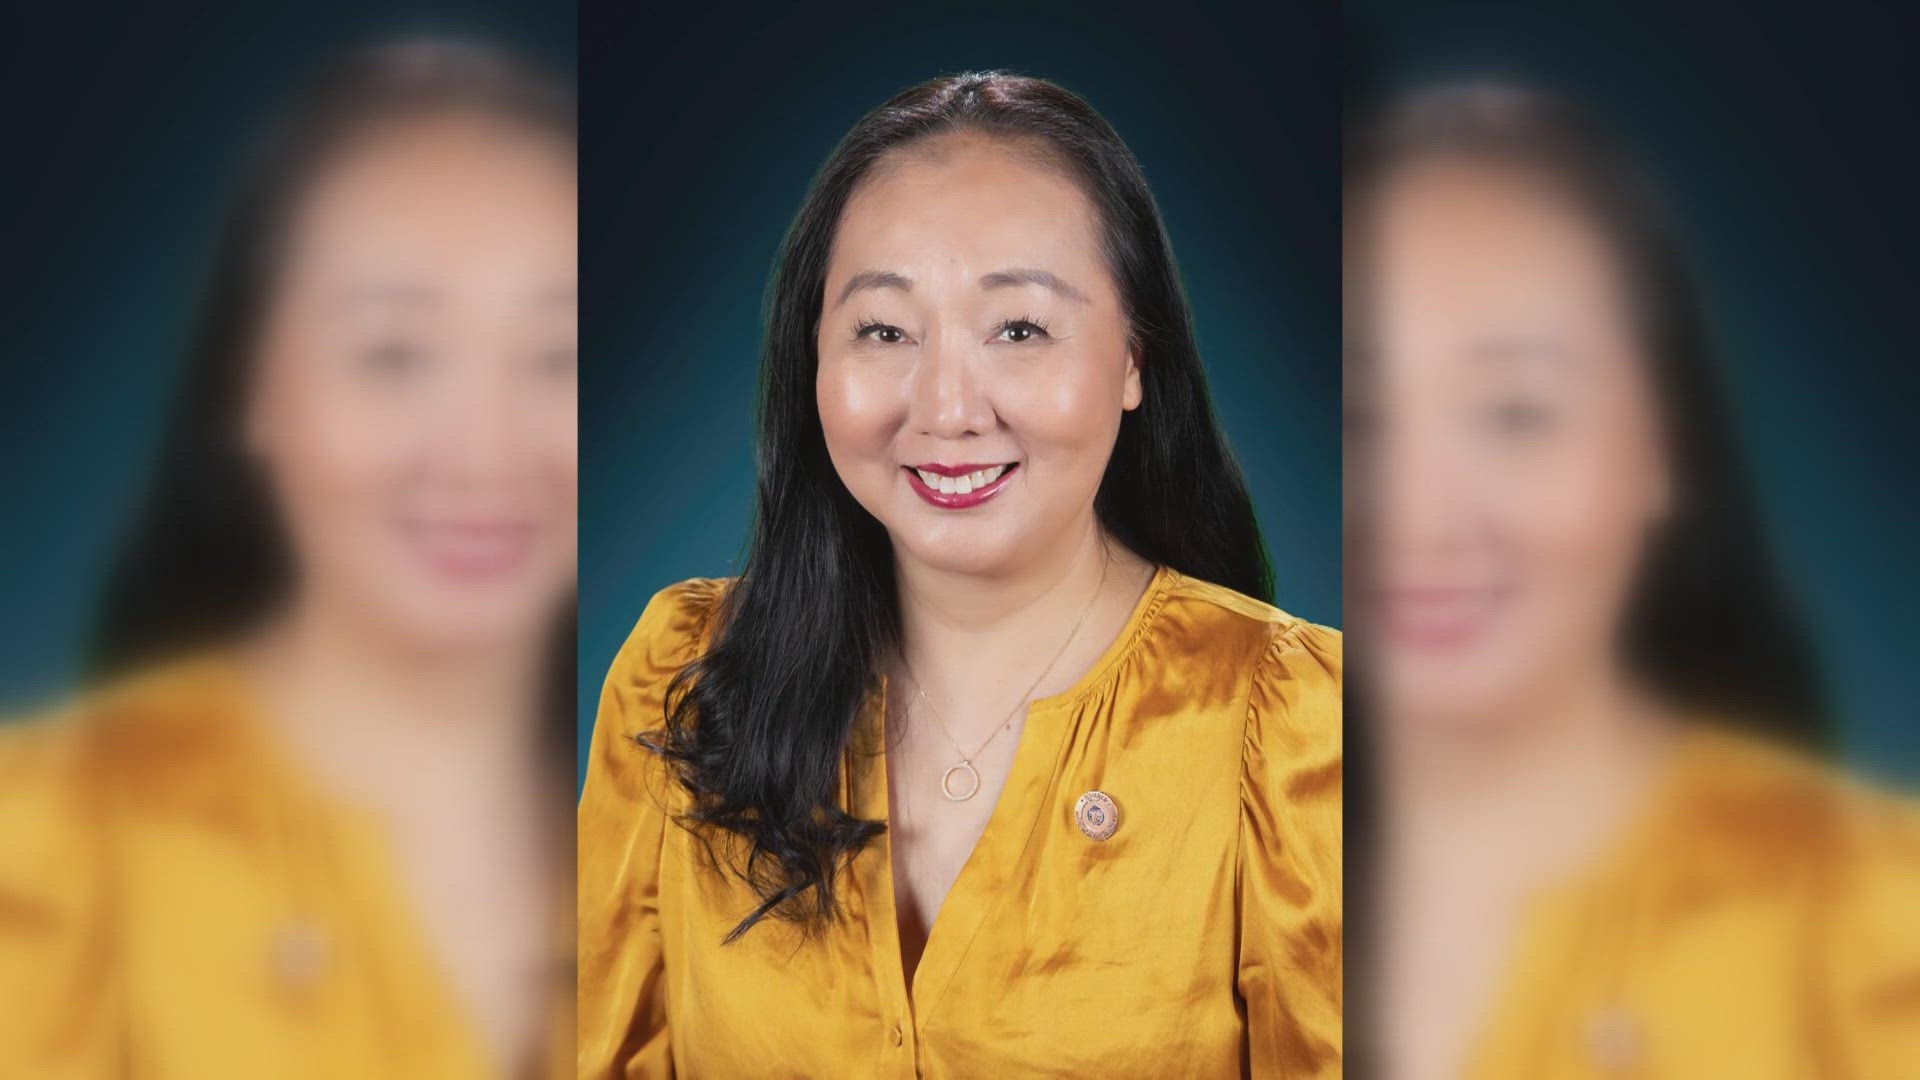 State Rep. Leezah Sun of the West Valley has resigned from her seat after the House Ethics Committee determined she committed a "pattern of disorderly behavior."